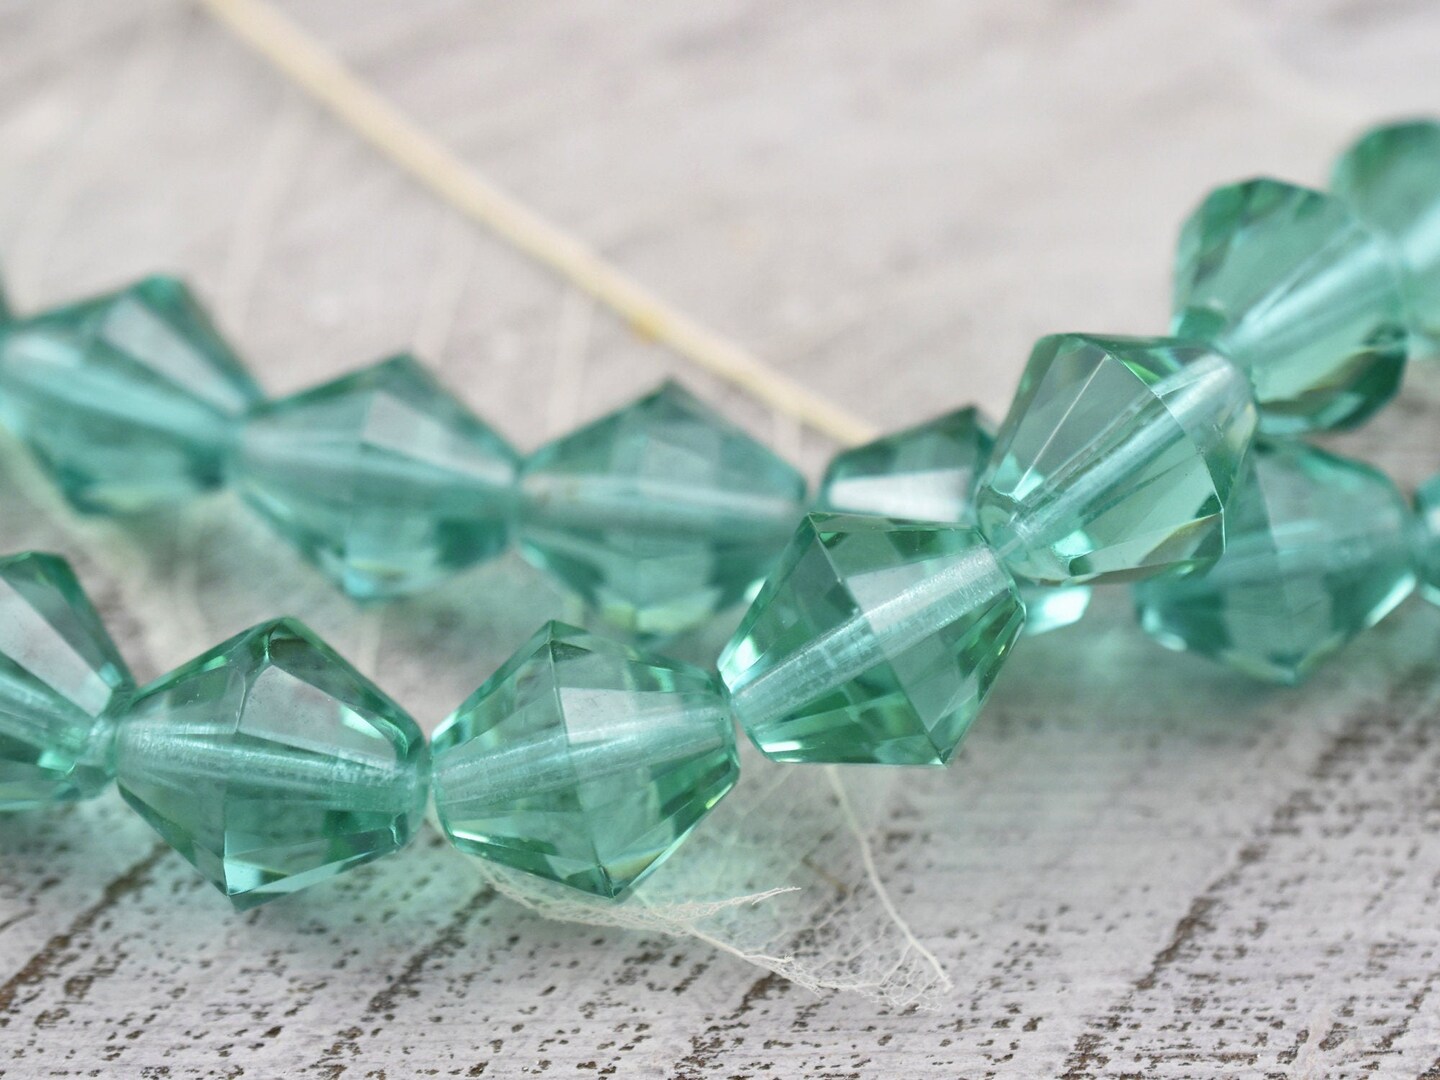 *2* 15mm Teal Green Faceted Bicone Beads